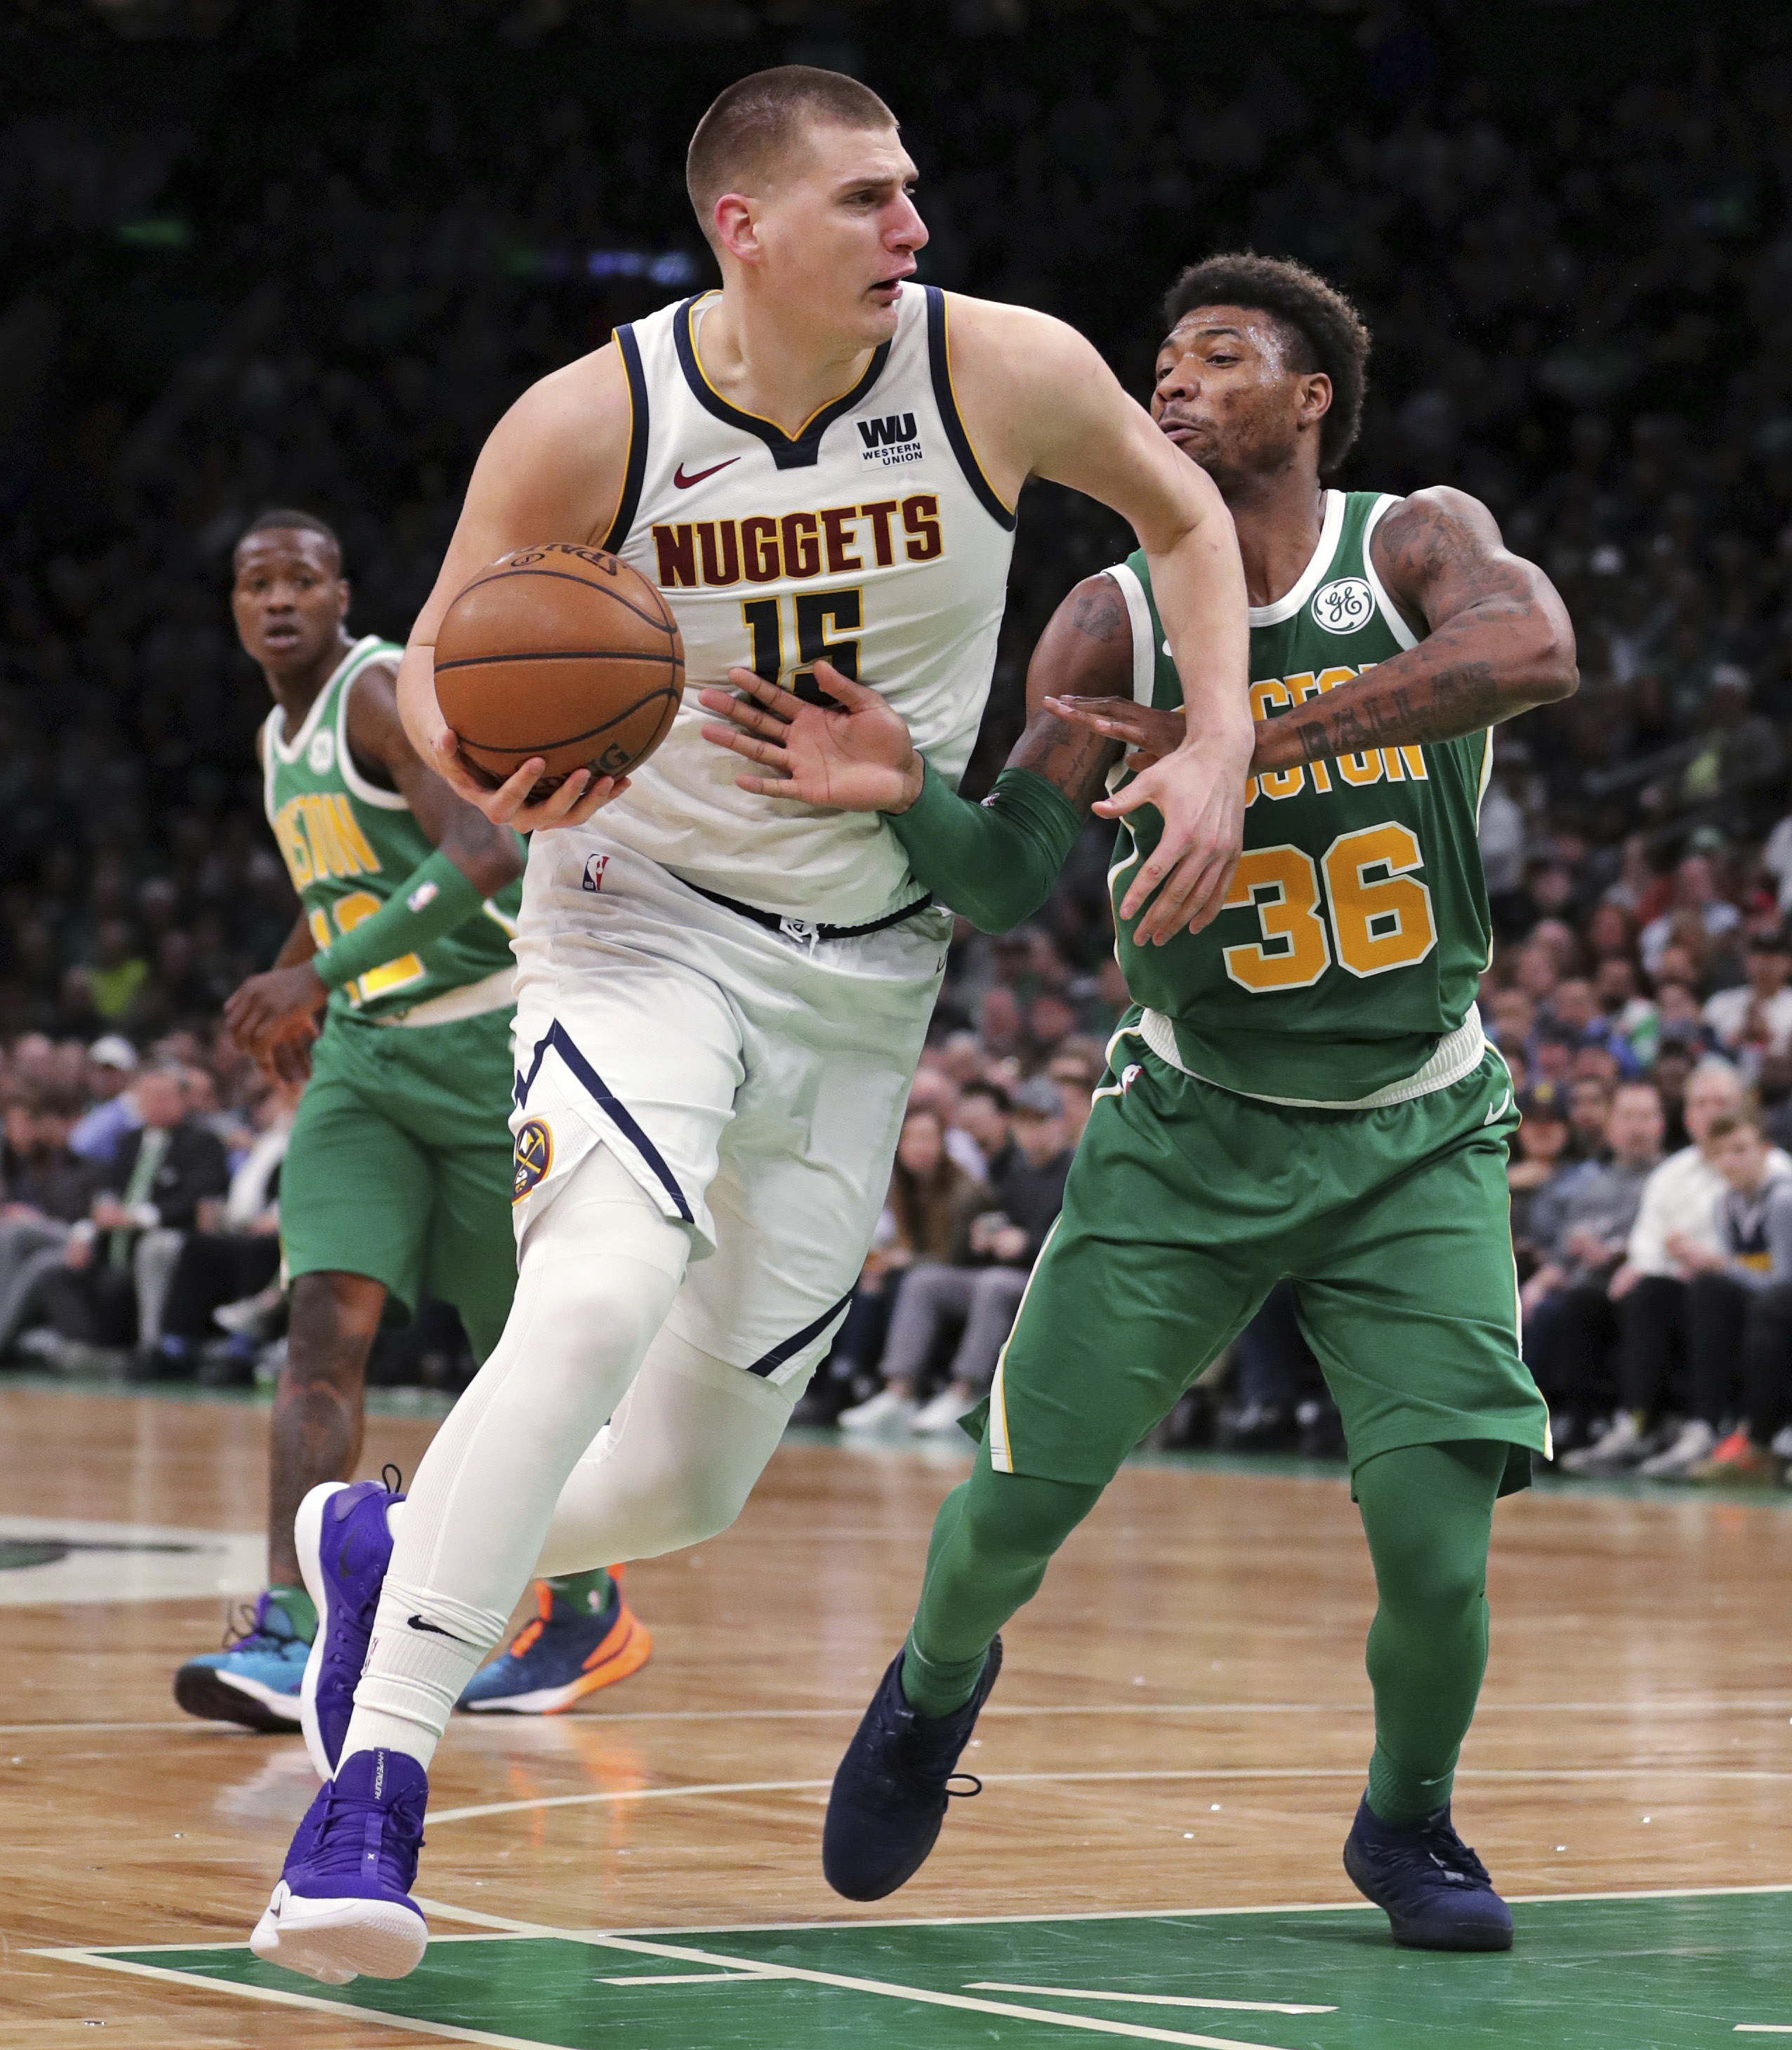 Nuggets clinch playoff spot with win over Celtics